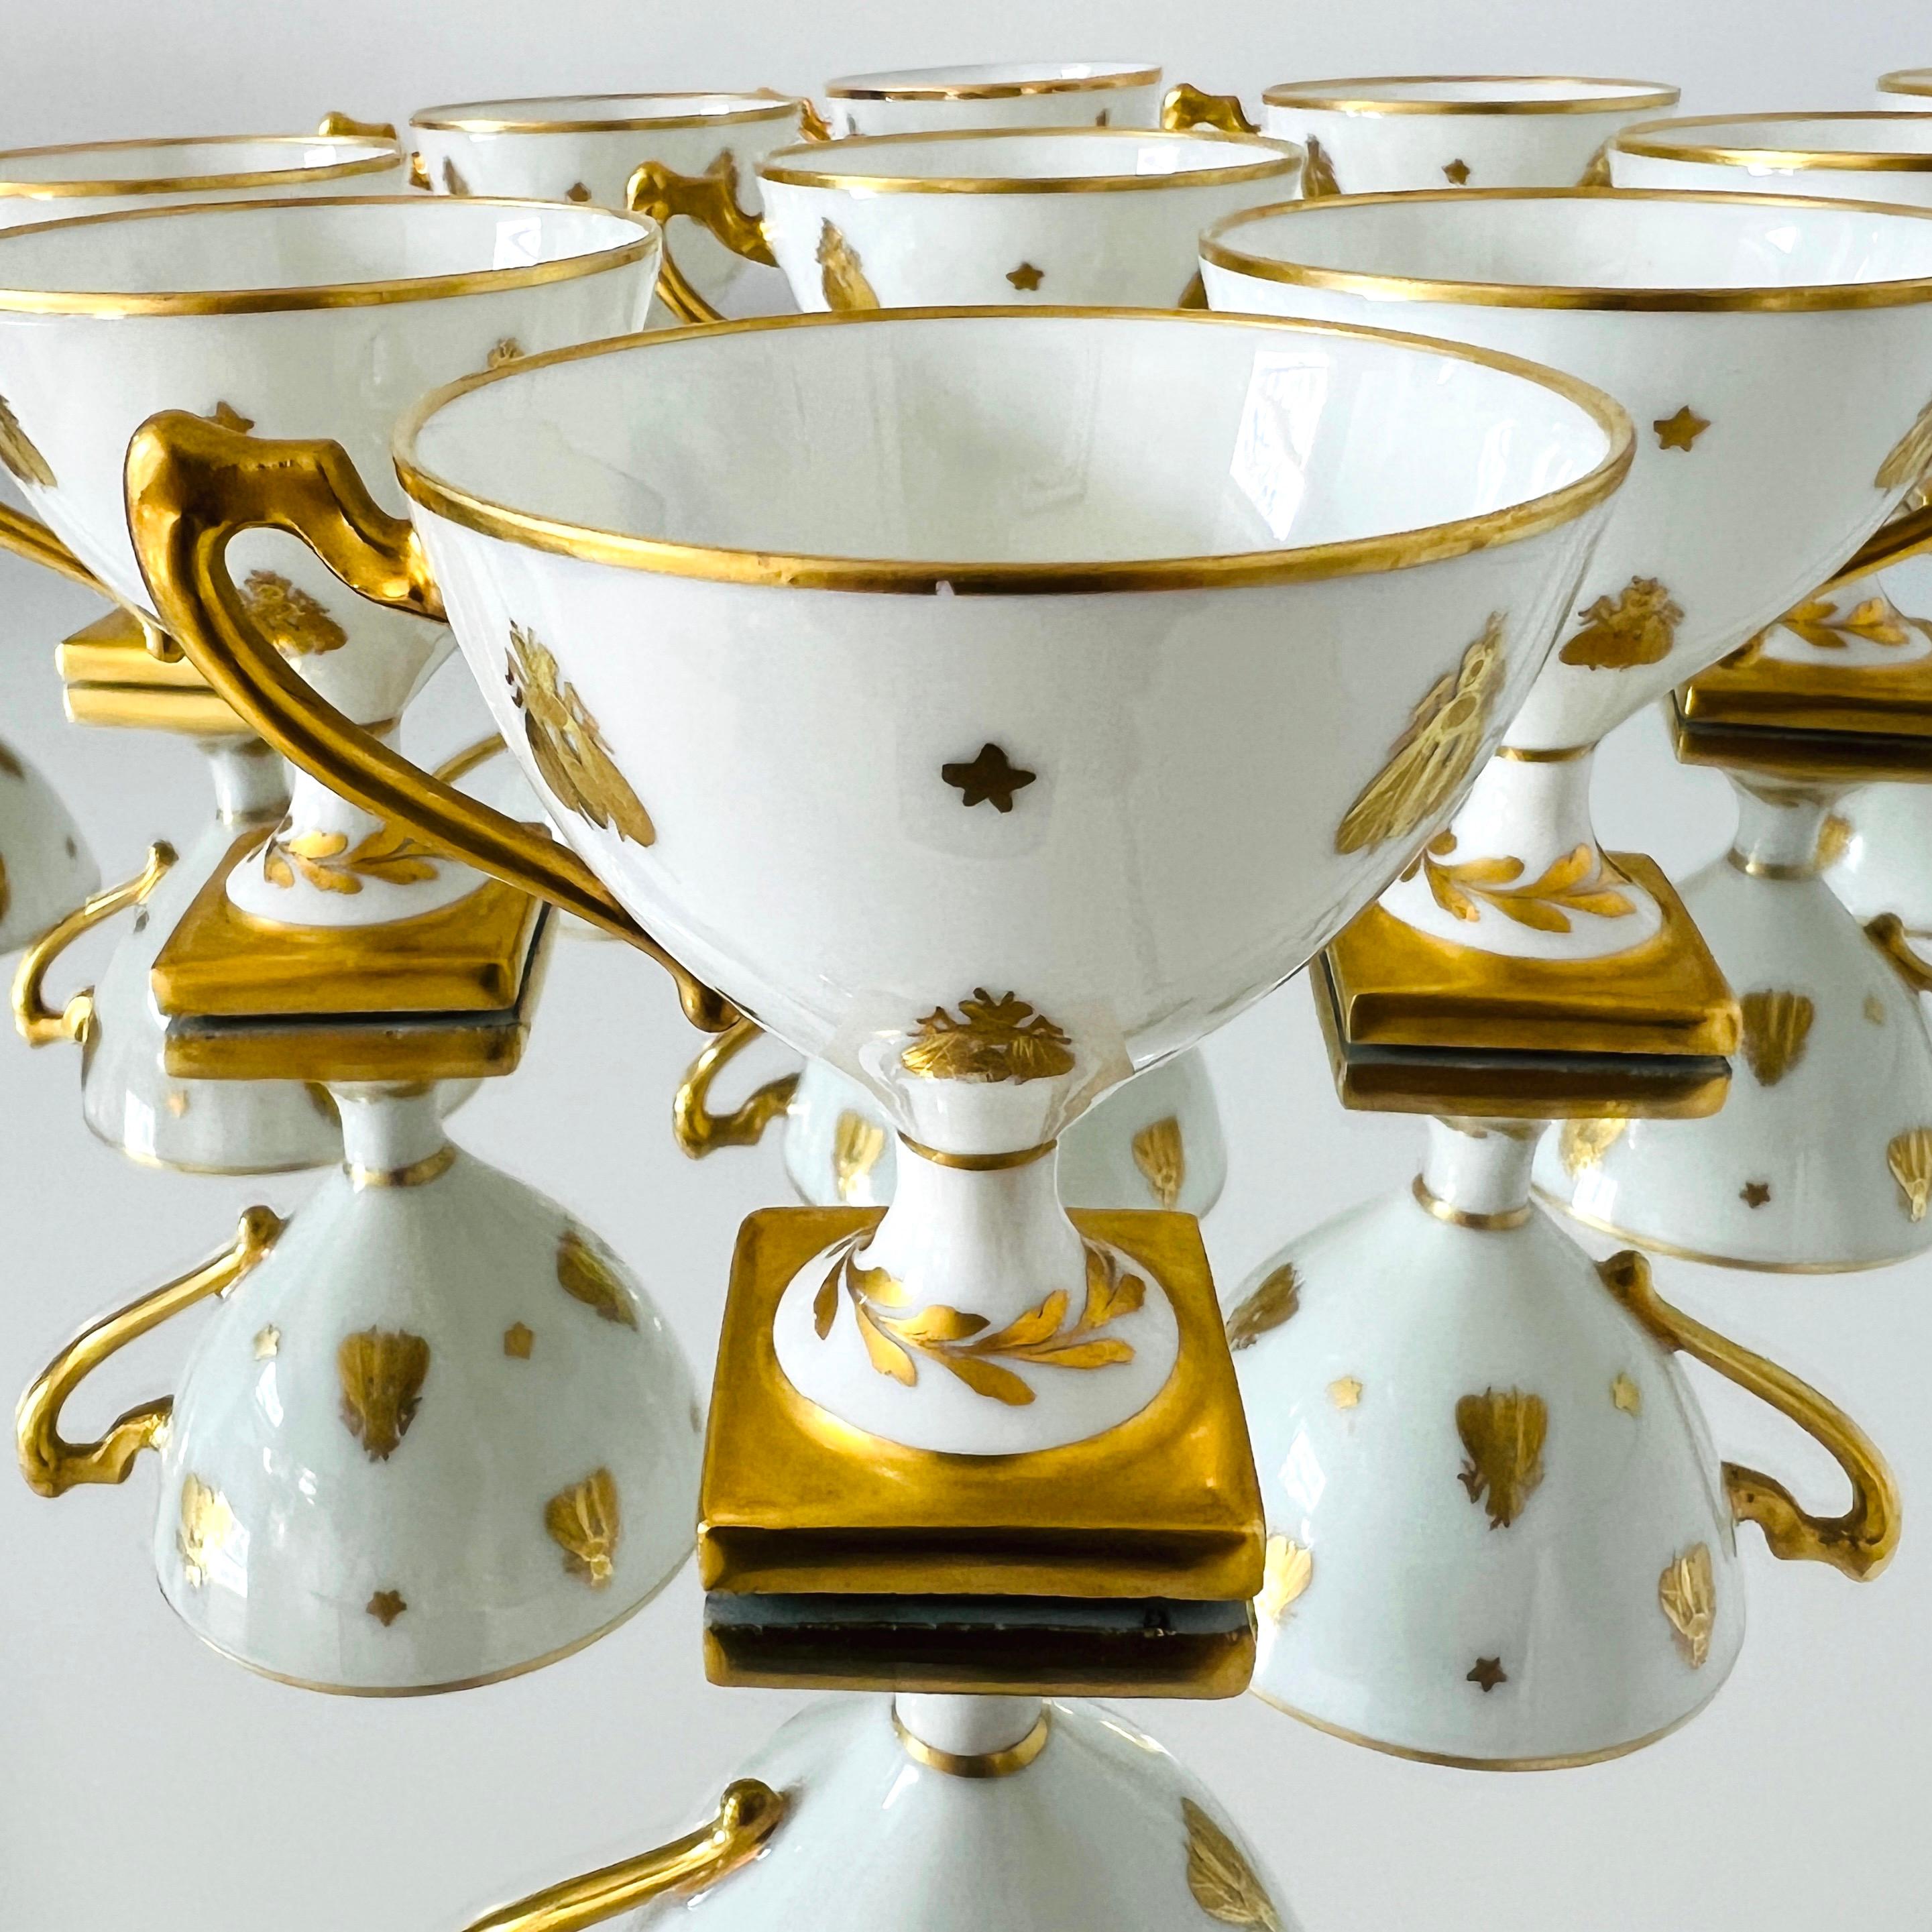 Le Tallec Golden Bees Porcelain Demitasse Cups and Saucers, circa 1957 Set/11-12 For Sale 4